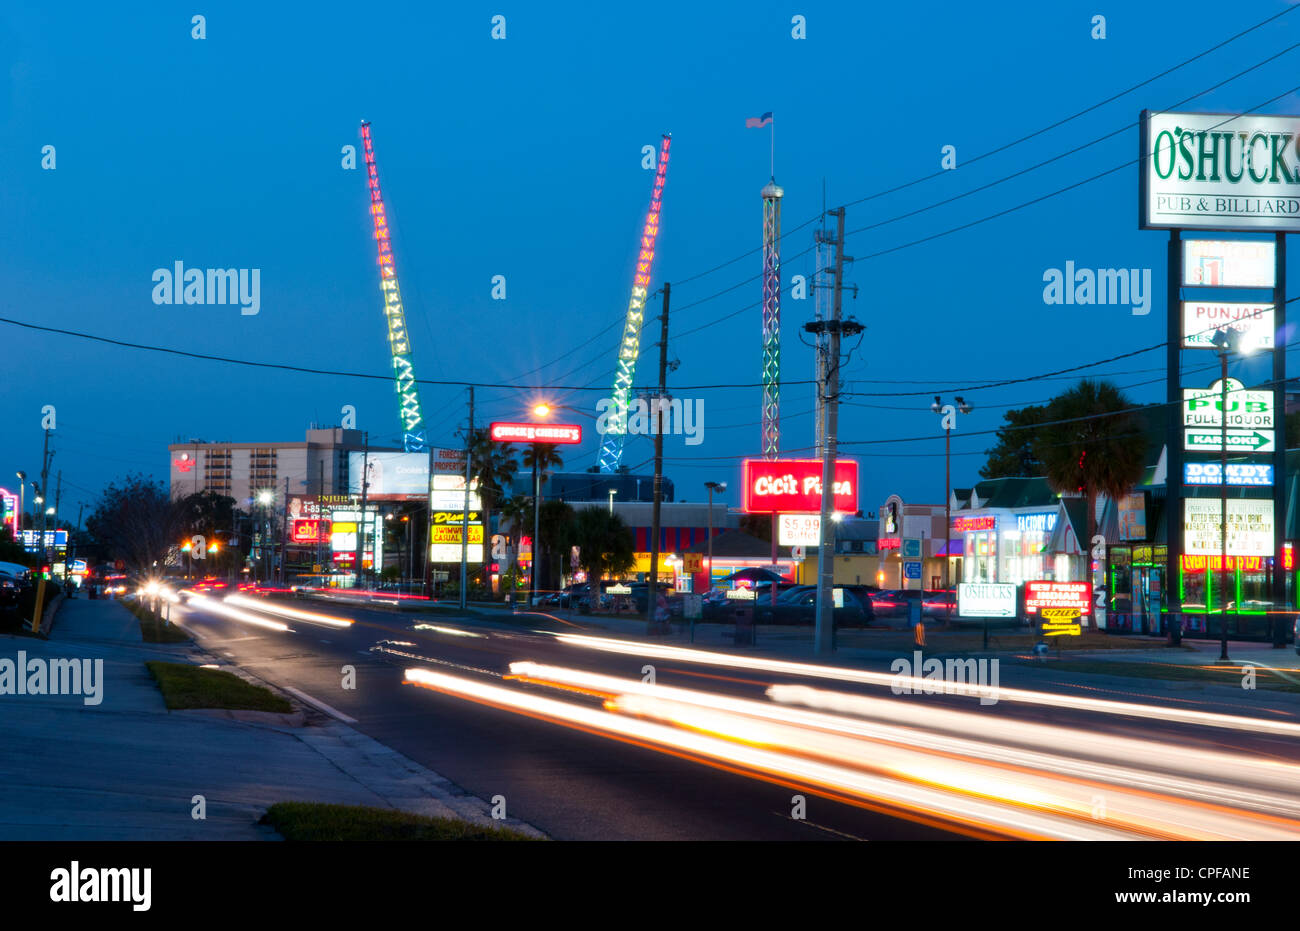 Twilight night shot of the tourist area of International Drive in Orlando Florida with colorful traffic and bungee jumping poles Stock Photo